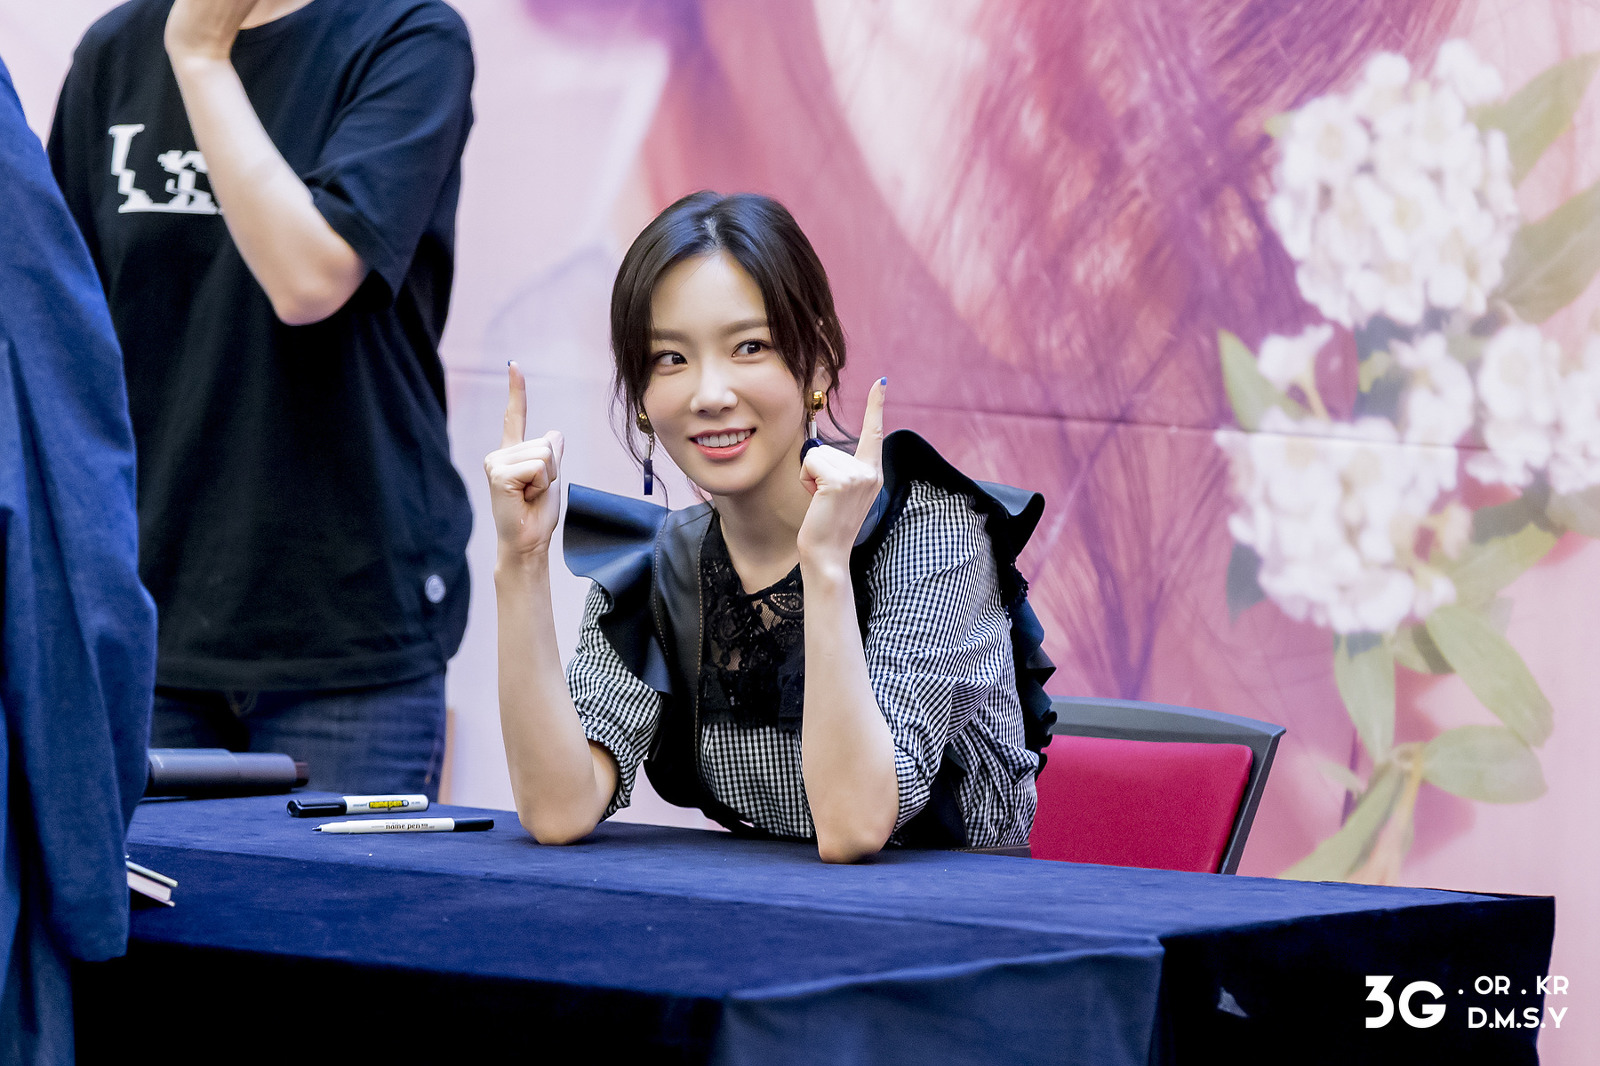 [PIC][16-04-2017]TaeYeon tham dự buổi Fansign cho “MY VOICE DELUXE EDITION” tại AK PLAZA vào chiều nay  - Page 5 2557F54358FDD8D31715AA